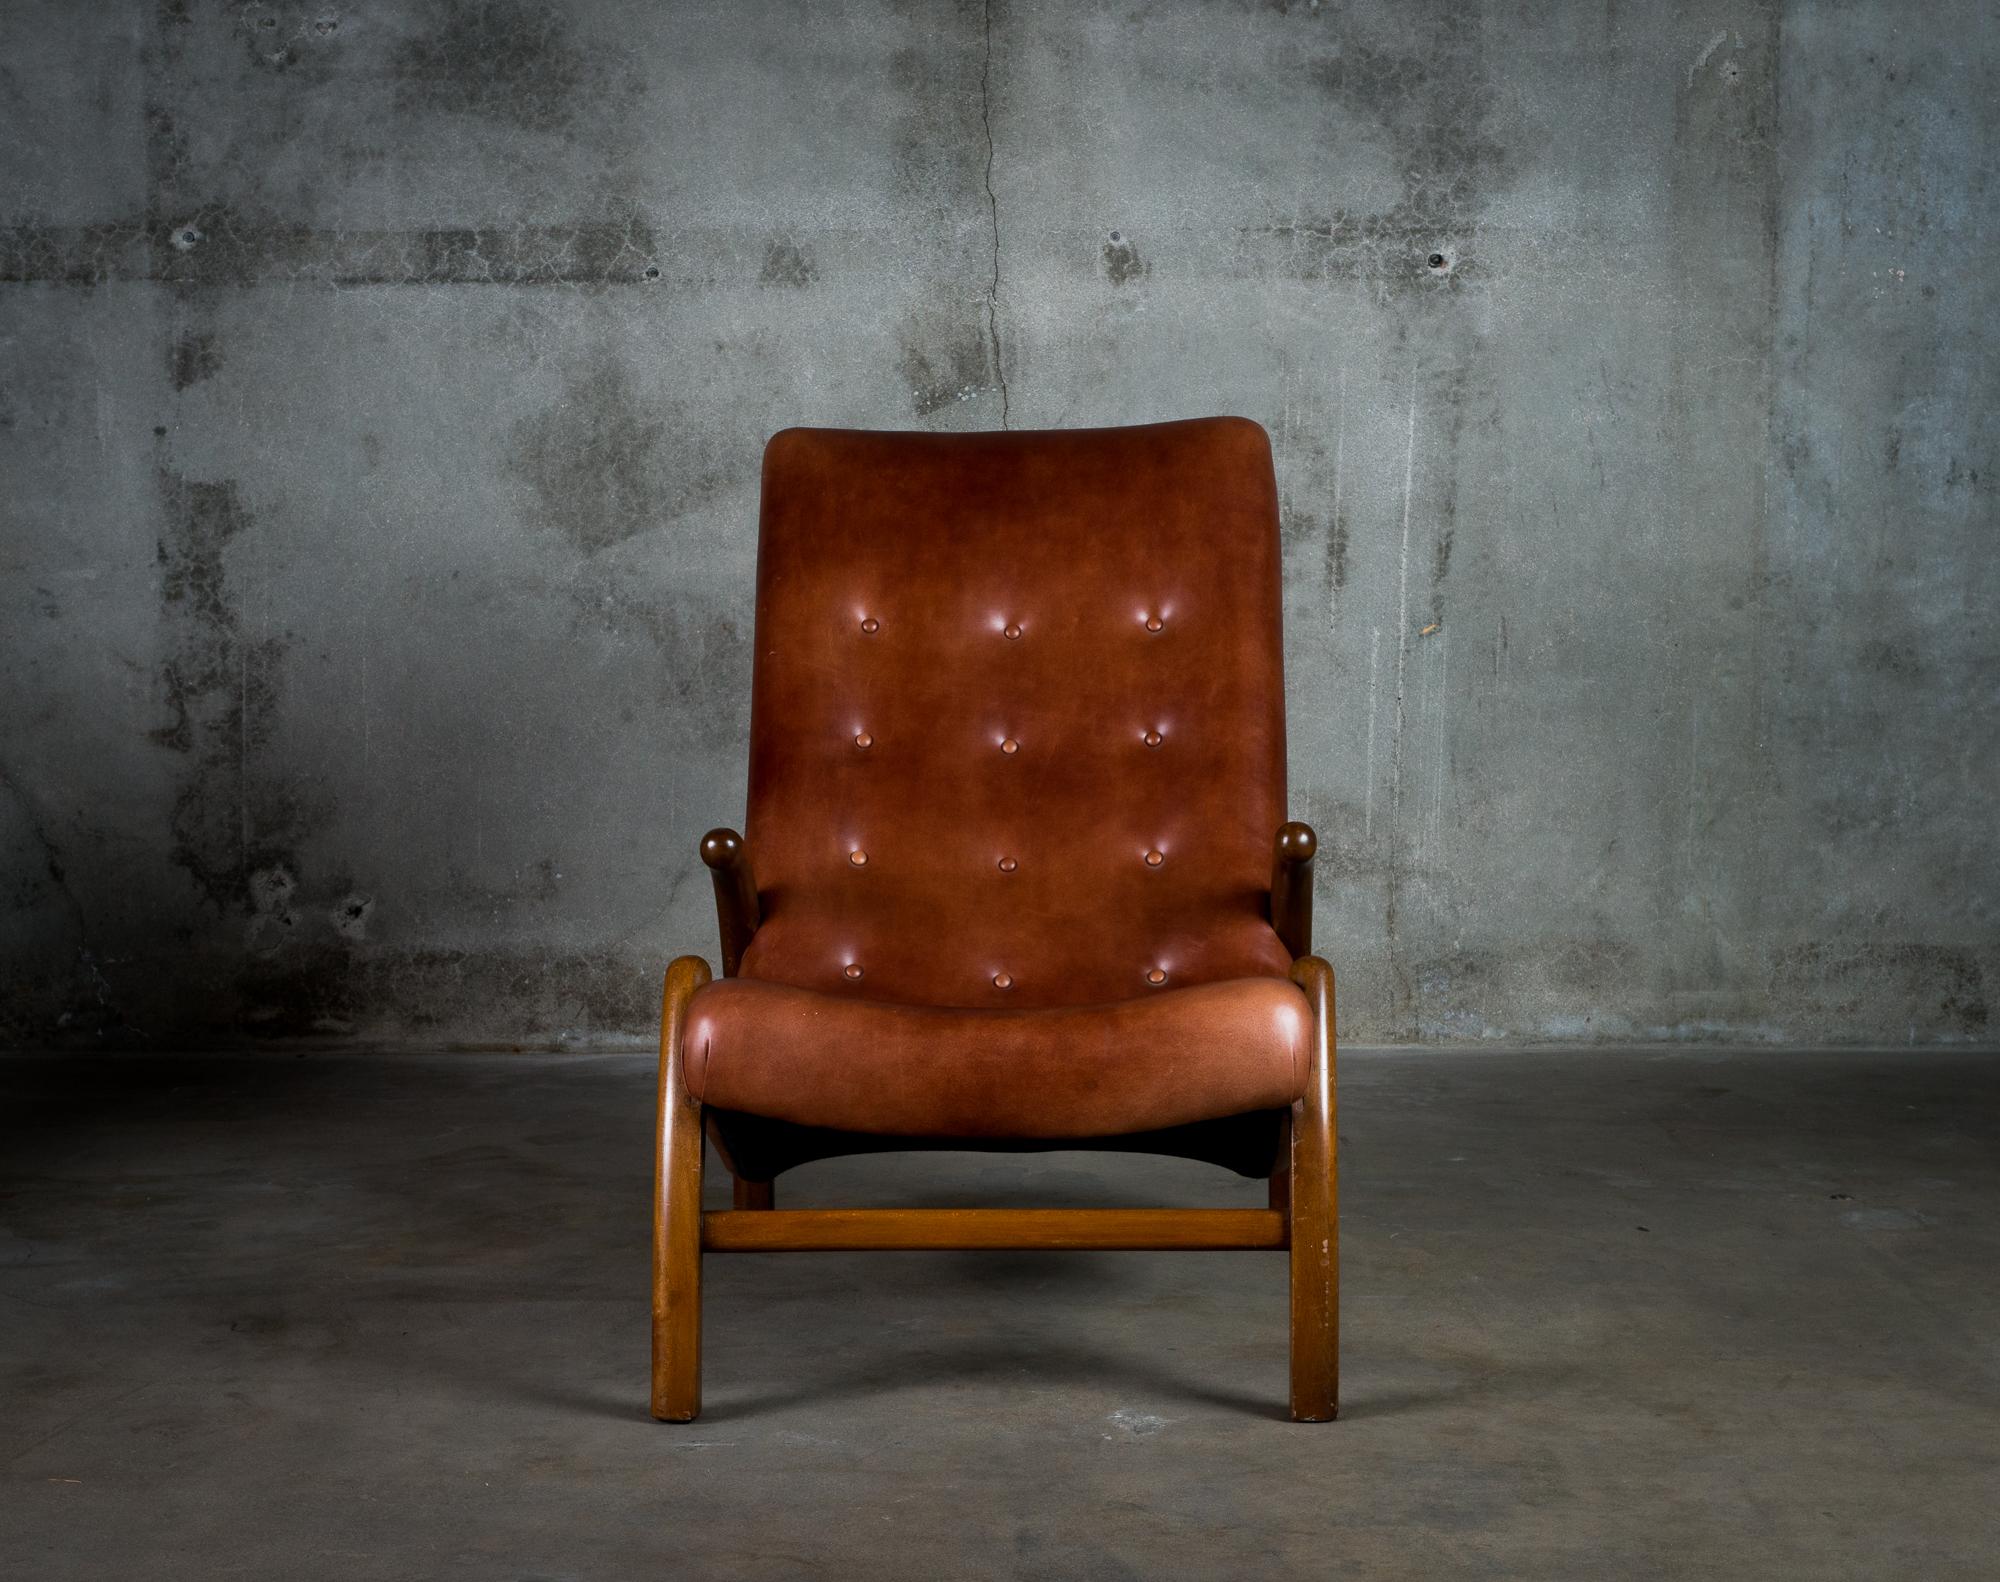 One leather upholstered lounge chair from Denmark, 1950s.